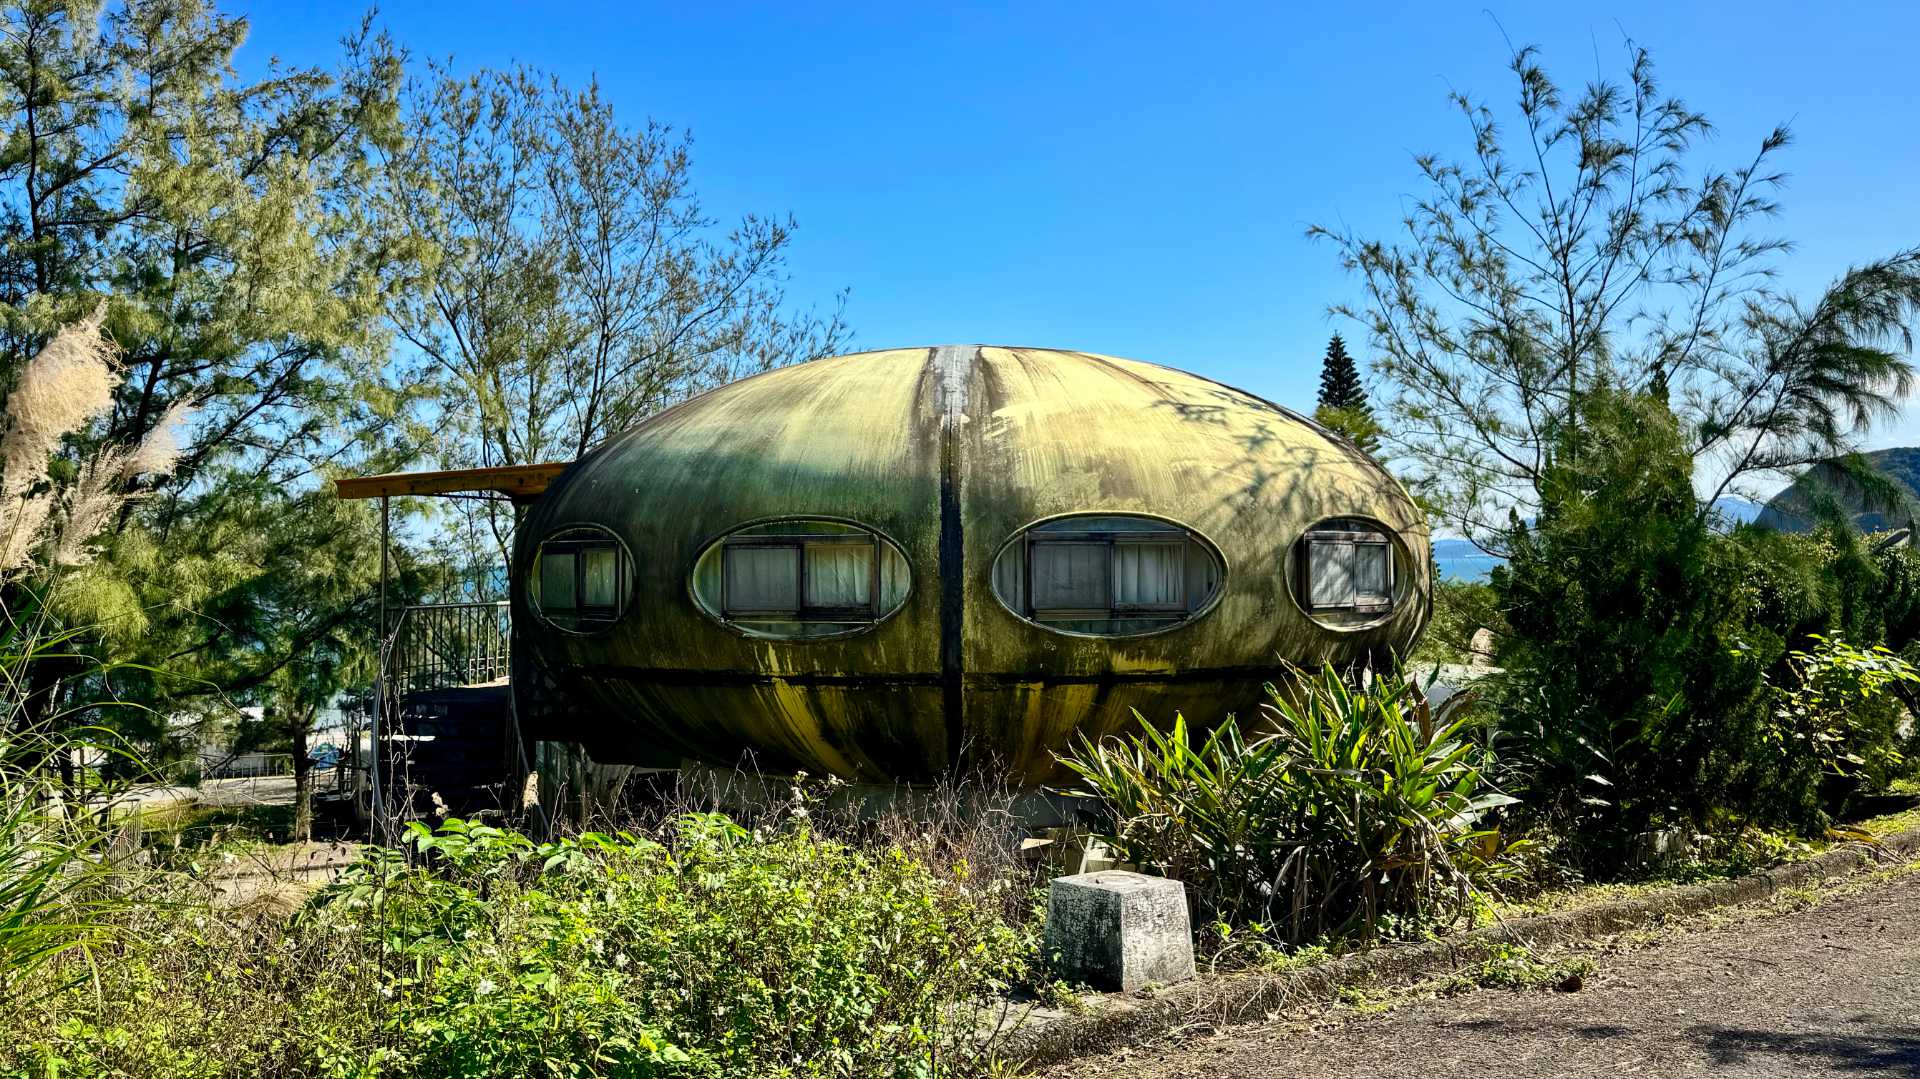 A flying saucer-style house, the Futuro. It appears to be covered in mold.